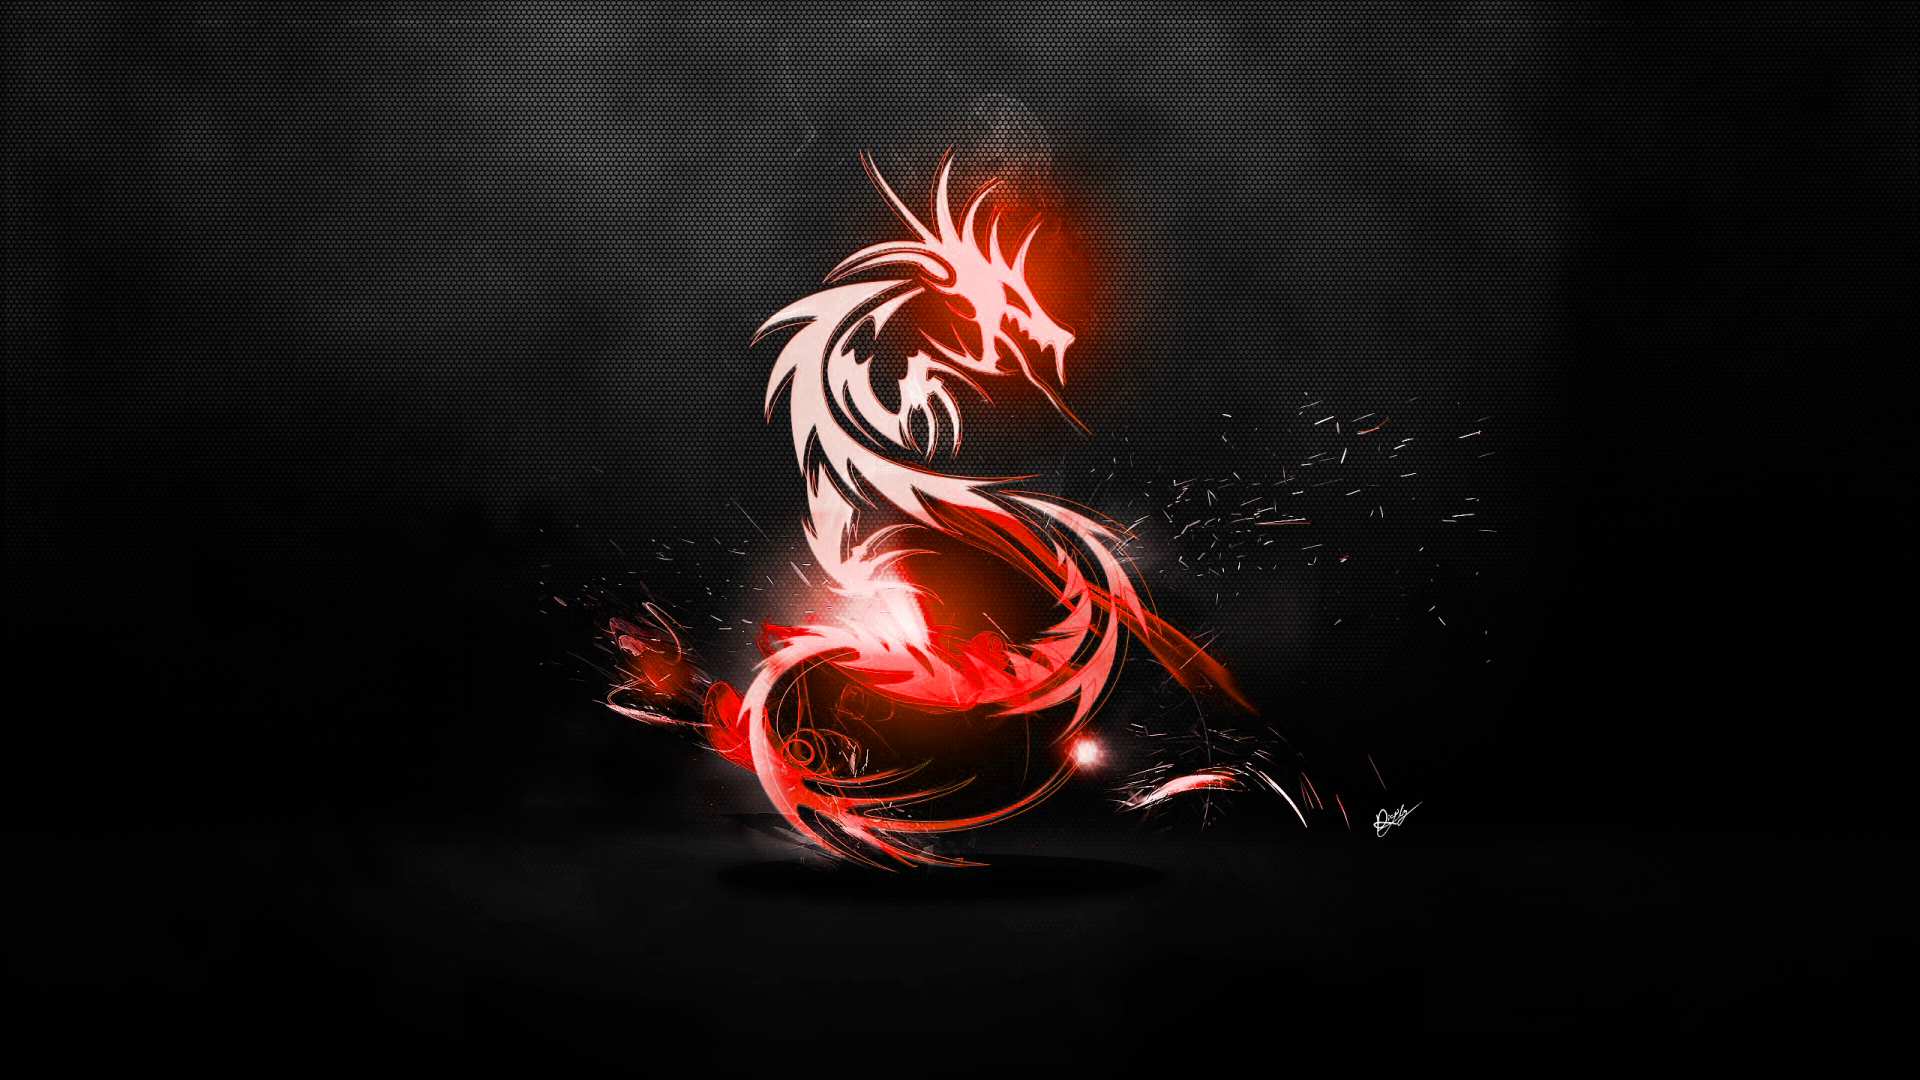 Black And Red Dragon Wallpaper Image Amp Pictures Becuo